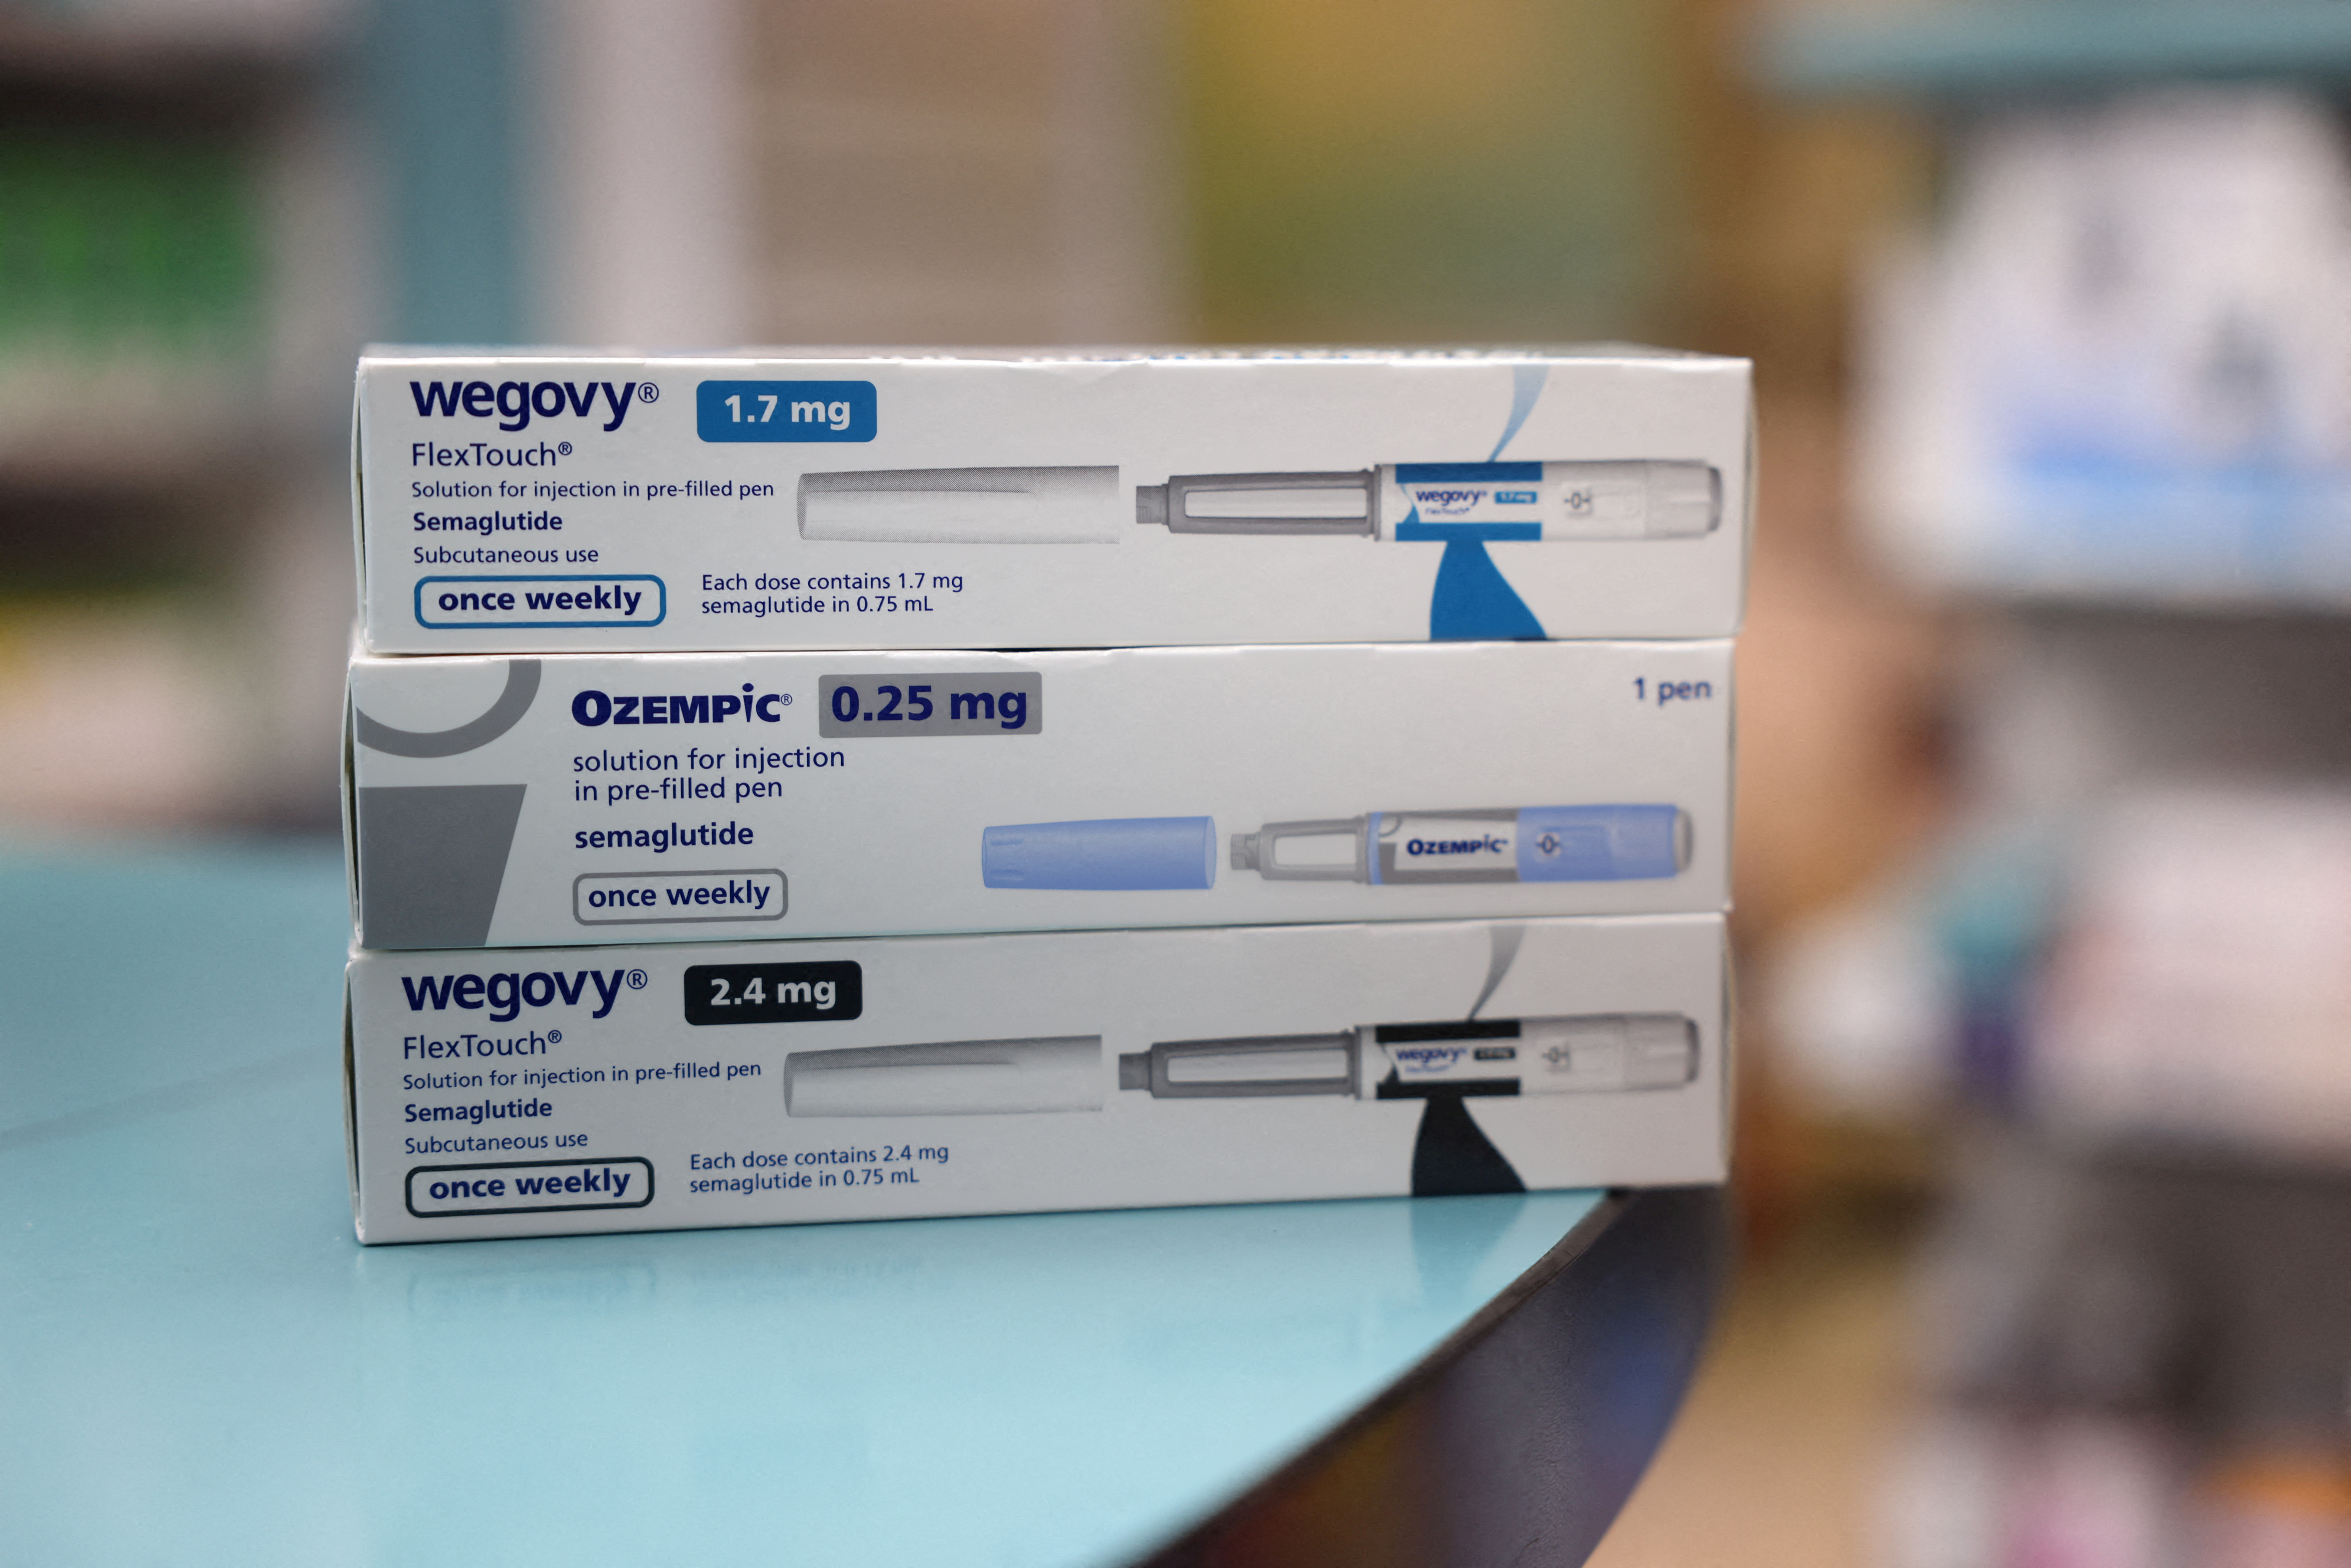 Boxes of Ozempic and Wegovy made by Novo Nordisk are seen at a pharmacy in London